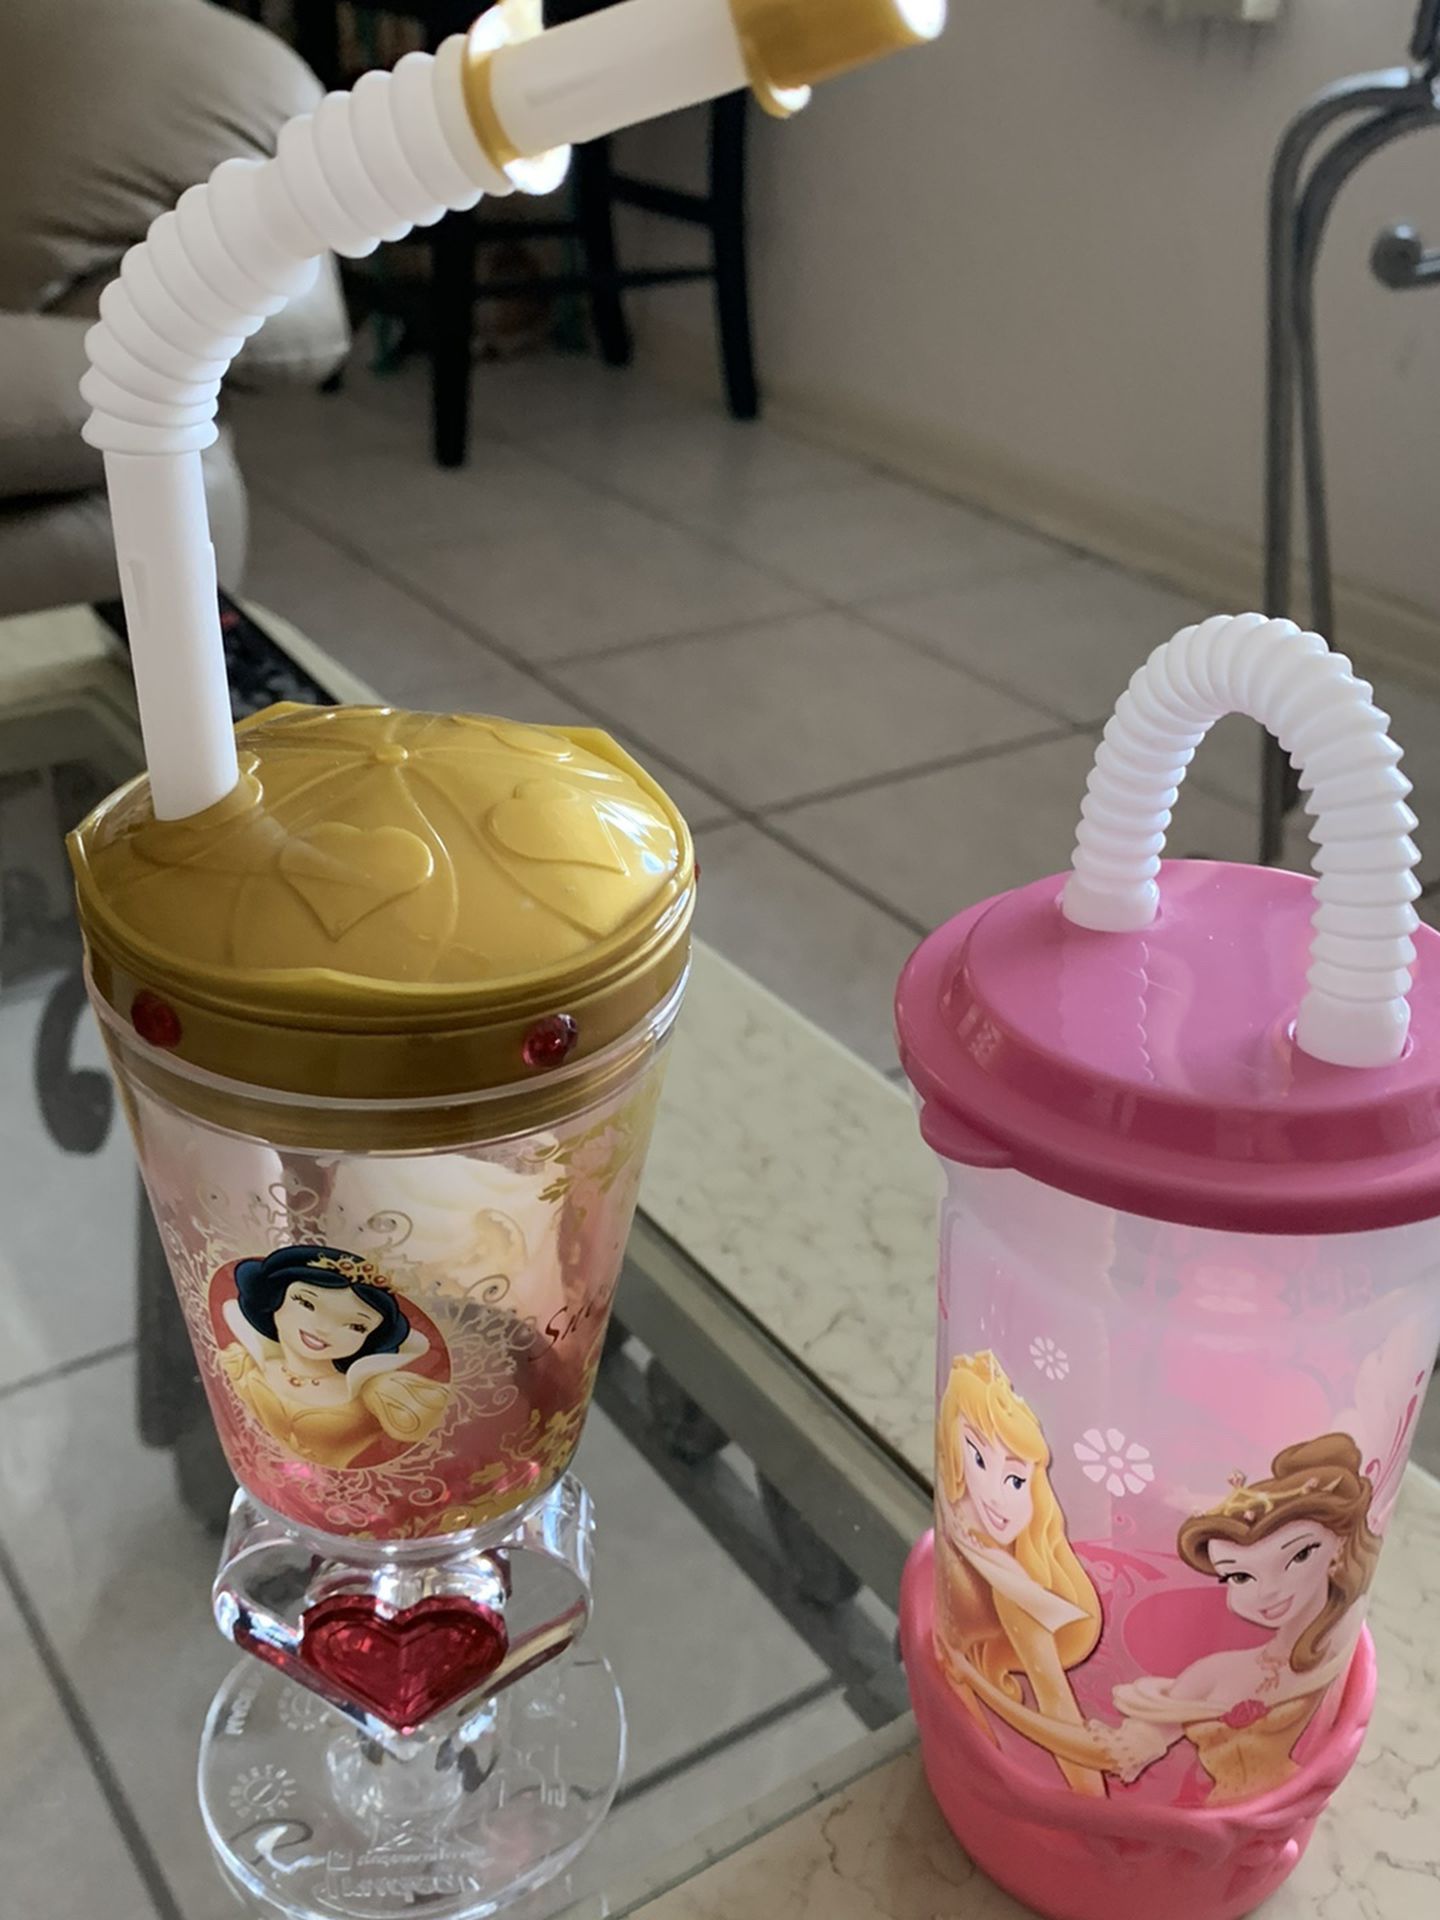 NEW DISNEY PRINCESS PLASTIC CUPS Snow White Princess Aurora, Belle, Cinderella.  New never used.  Both for $10